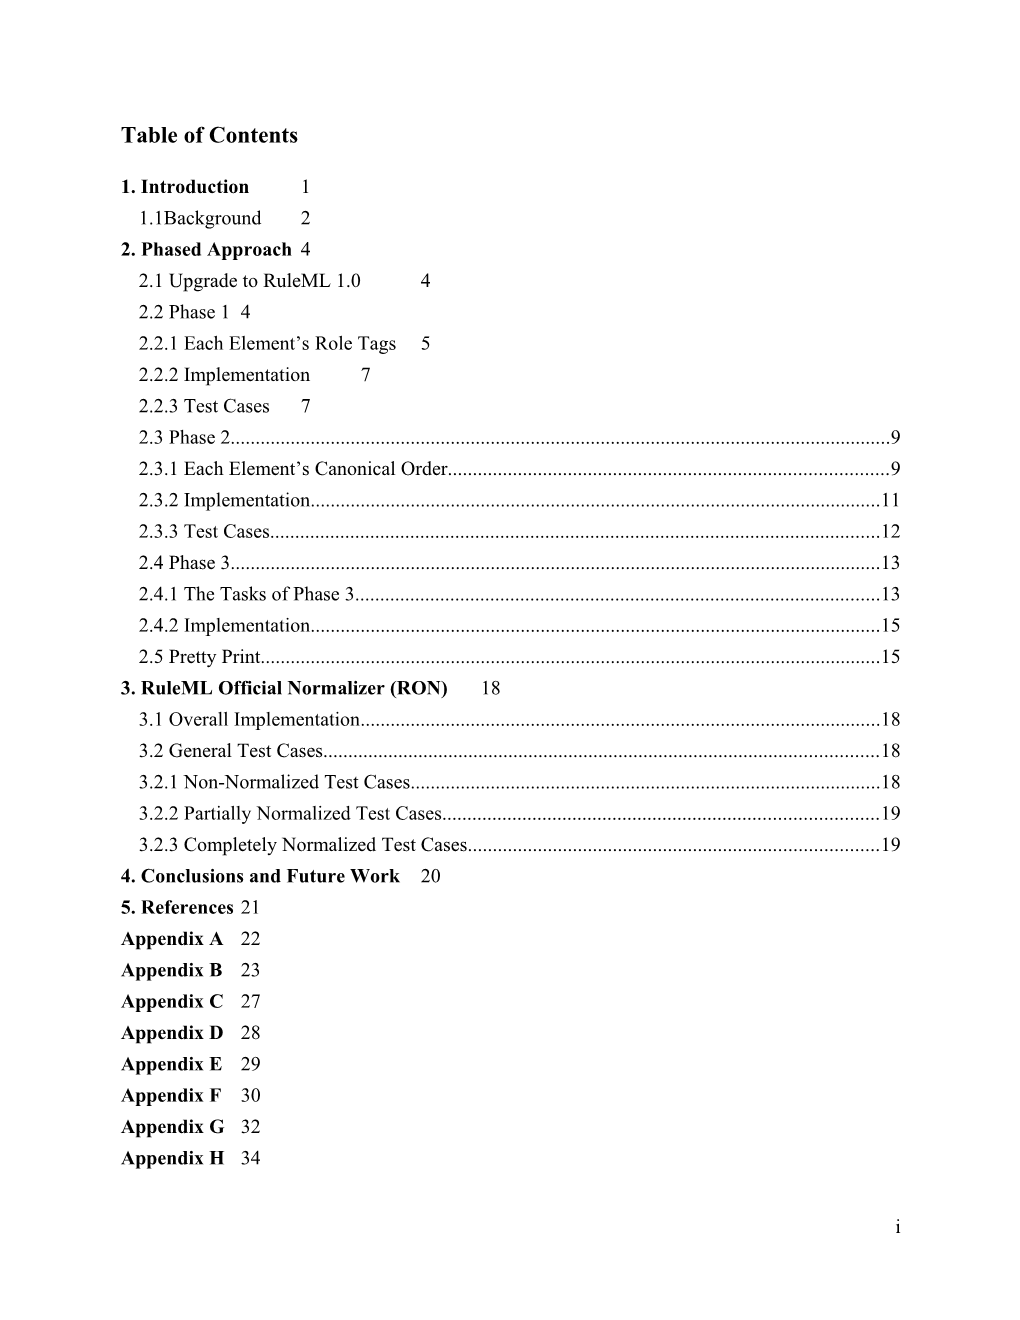 Table of Contents s243